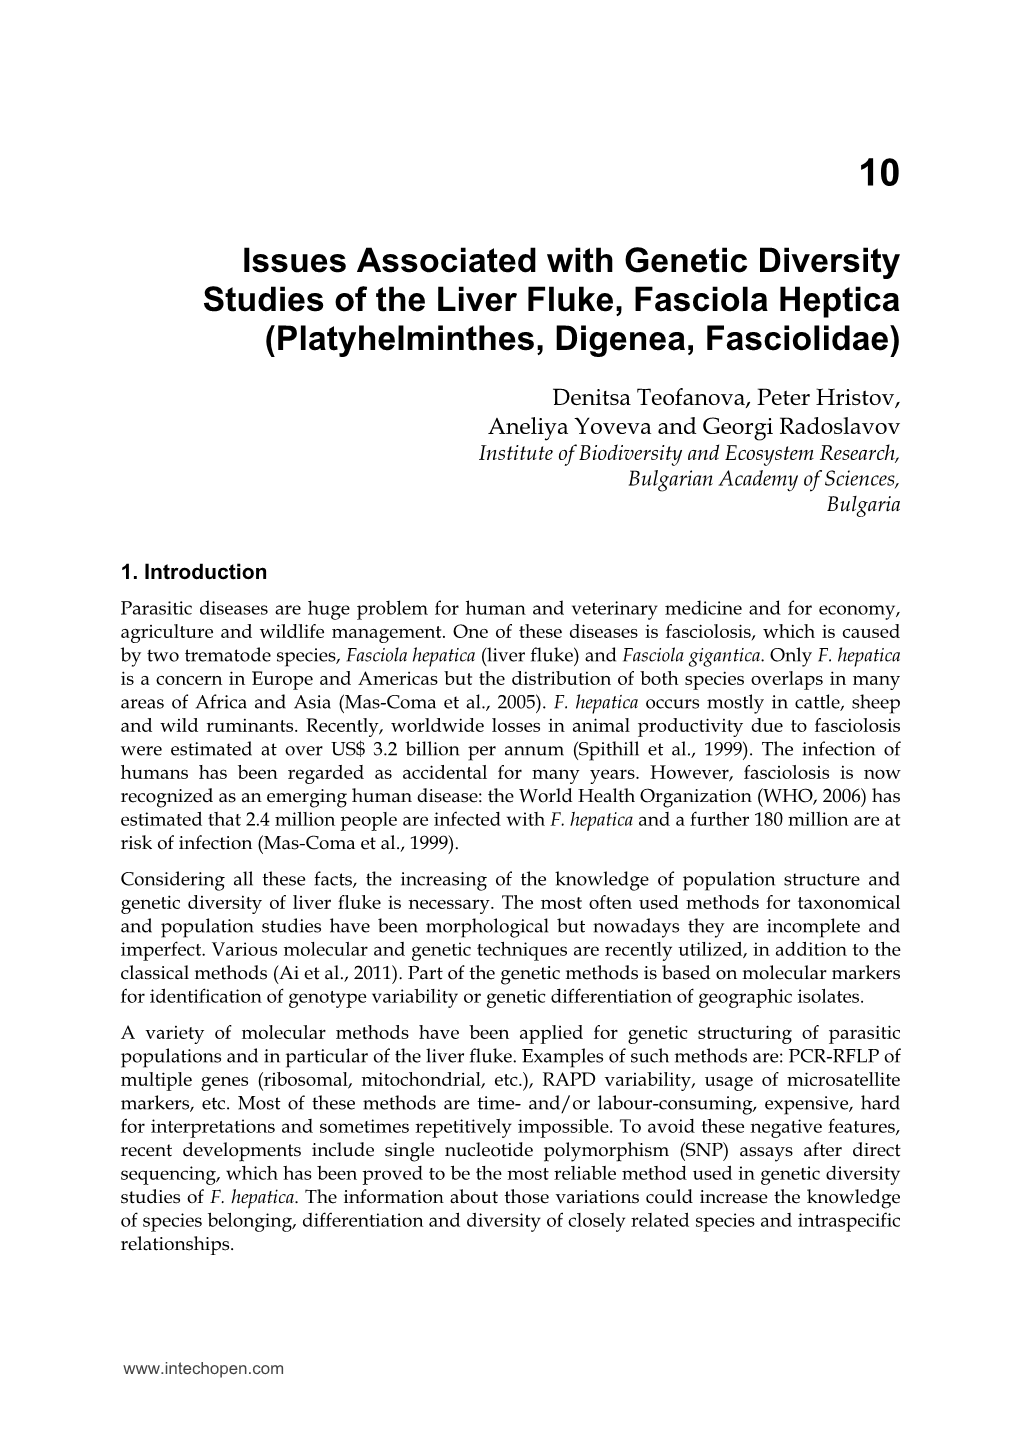 Issues Associated with Genetic Diversity Studies of the Liver Fluke, Fasciola Heptica (Platyhelminthes, Digenea, Fasciolidae)